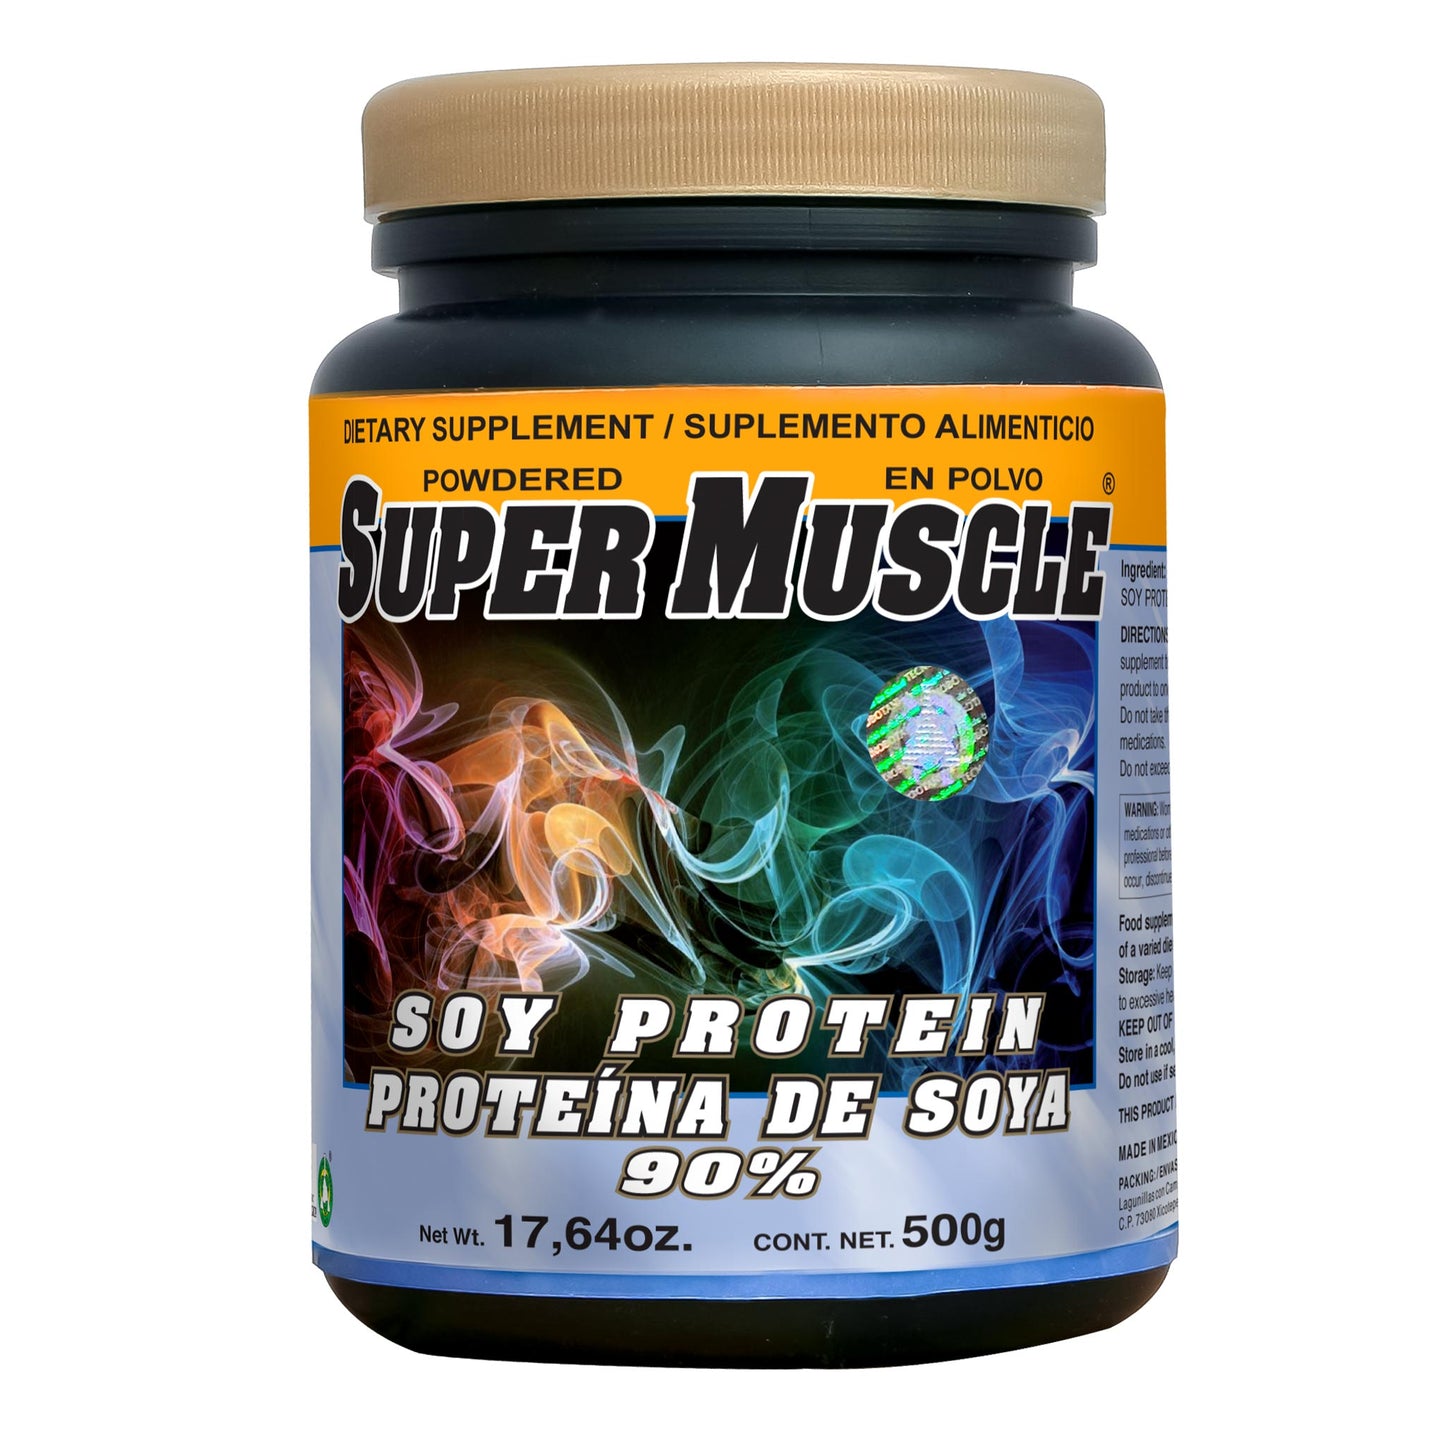 SUPERMUSCLE ® polvo 500g